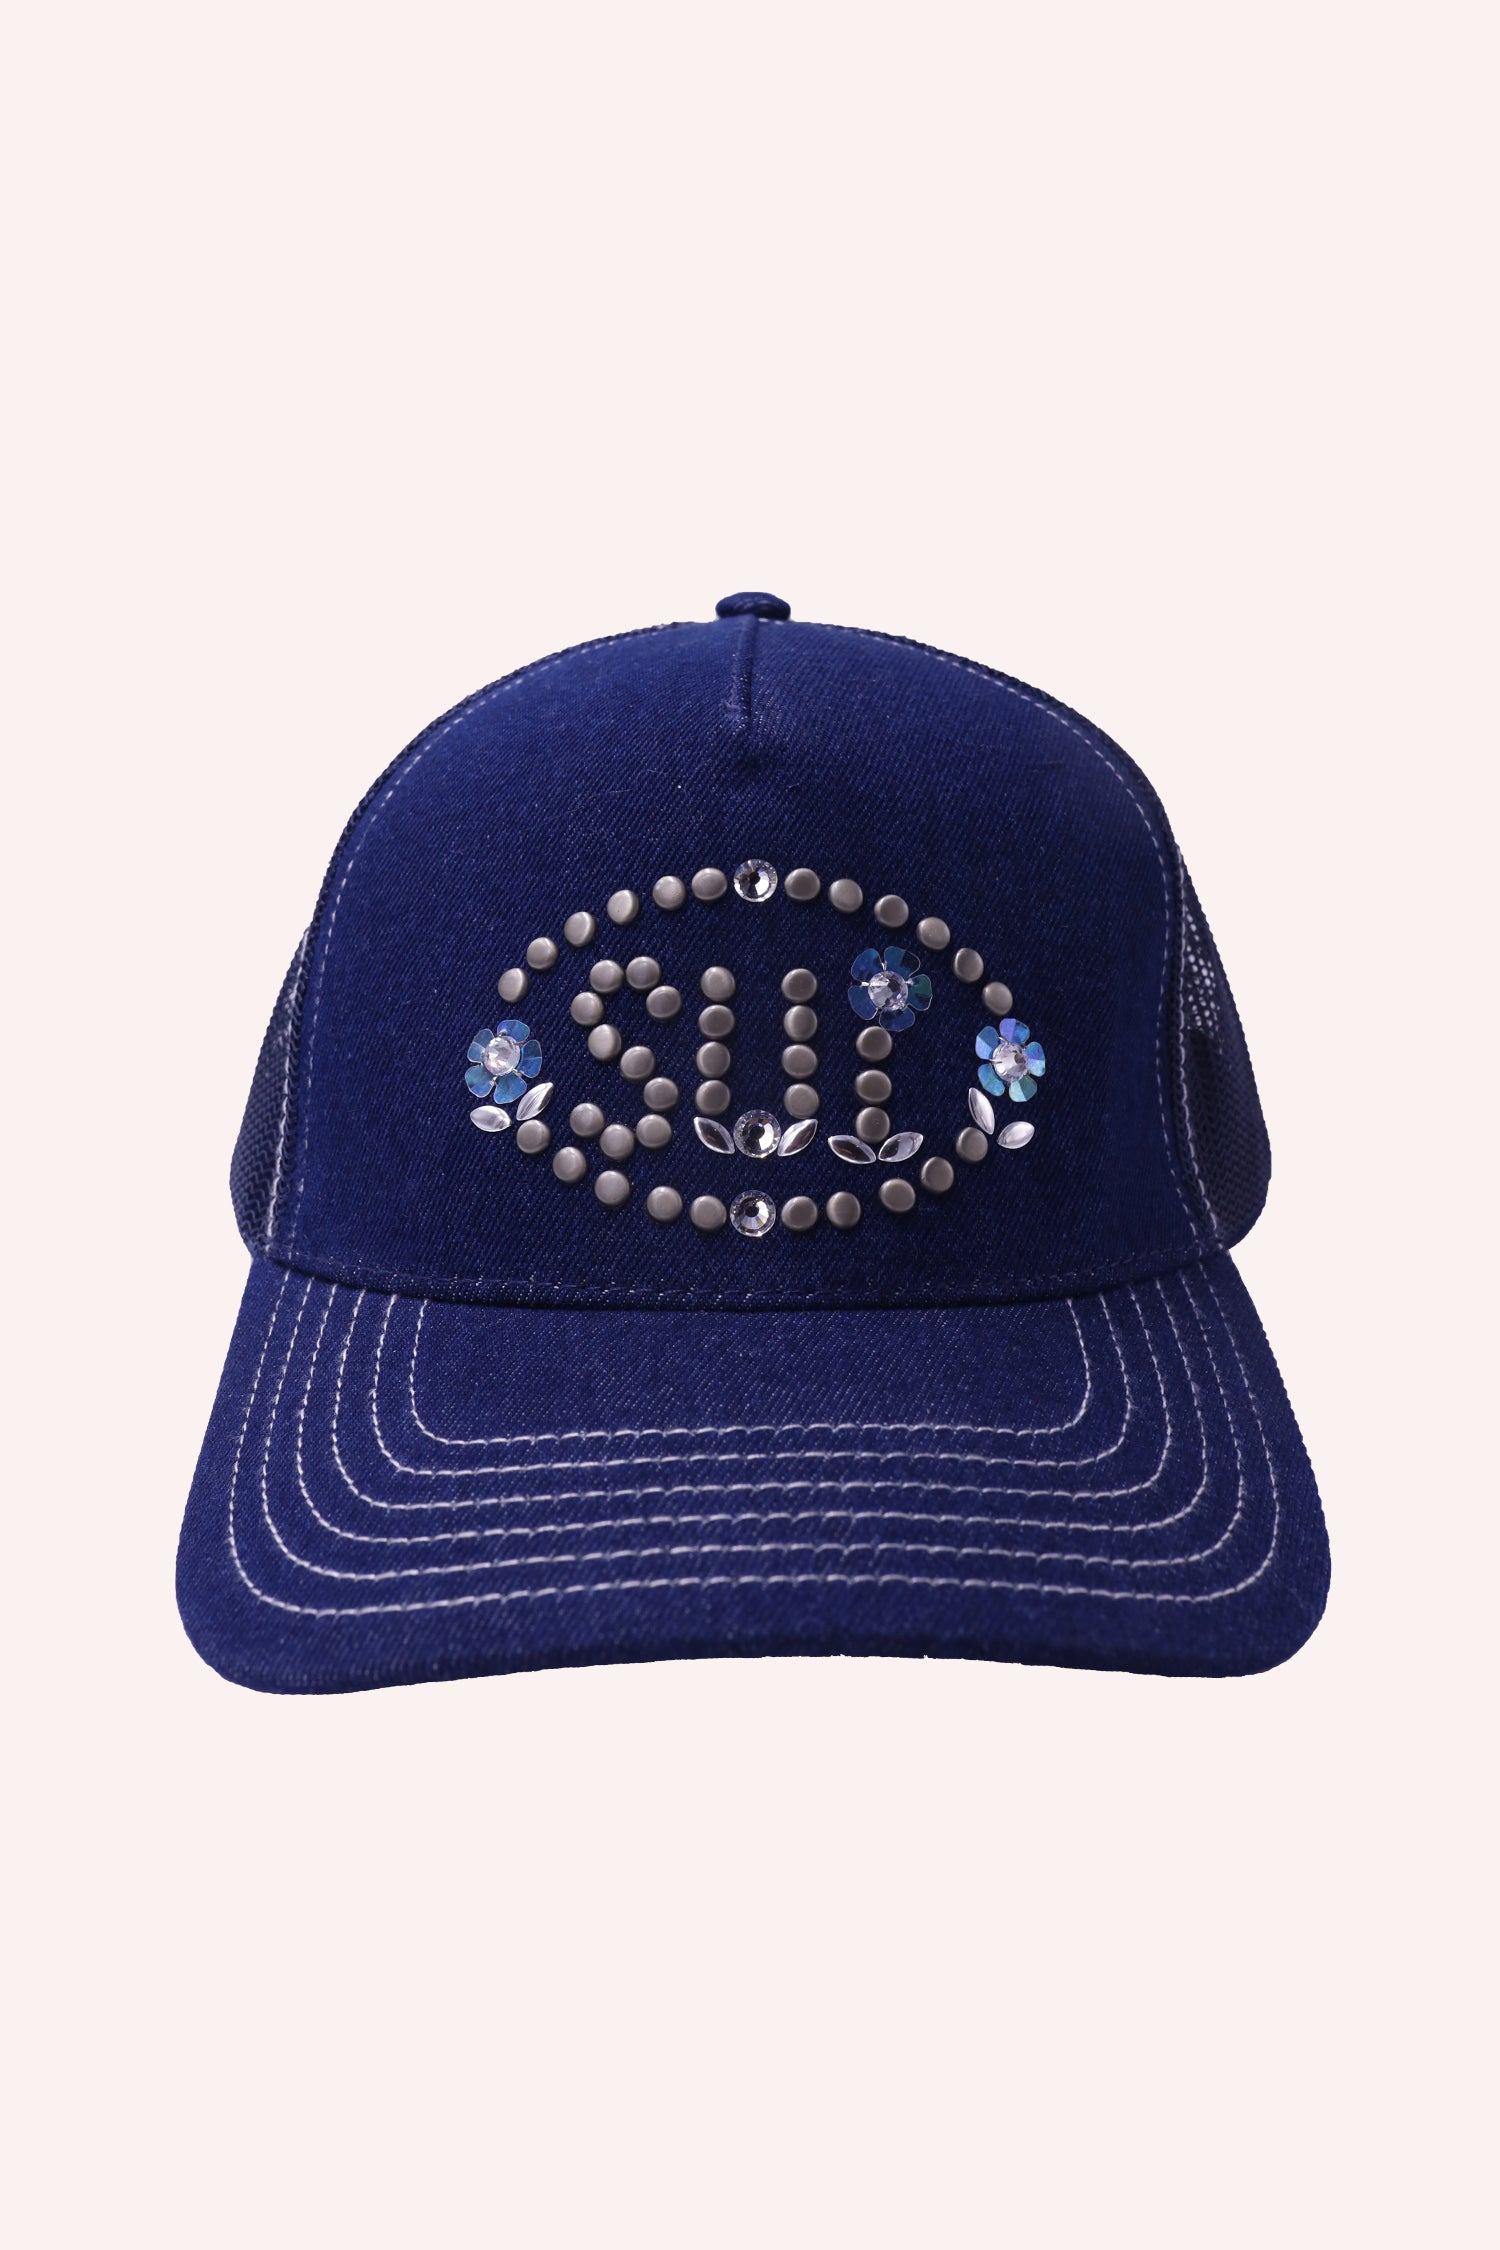 Studded Sui logo inside an oval with a floral design on each side of it, U with floral bottom, I with a floral dot